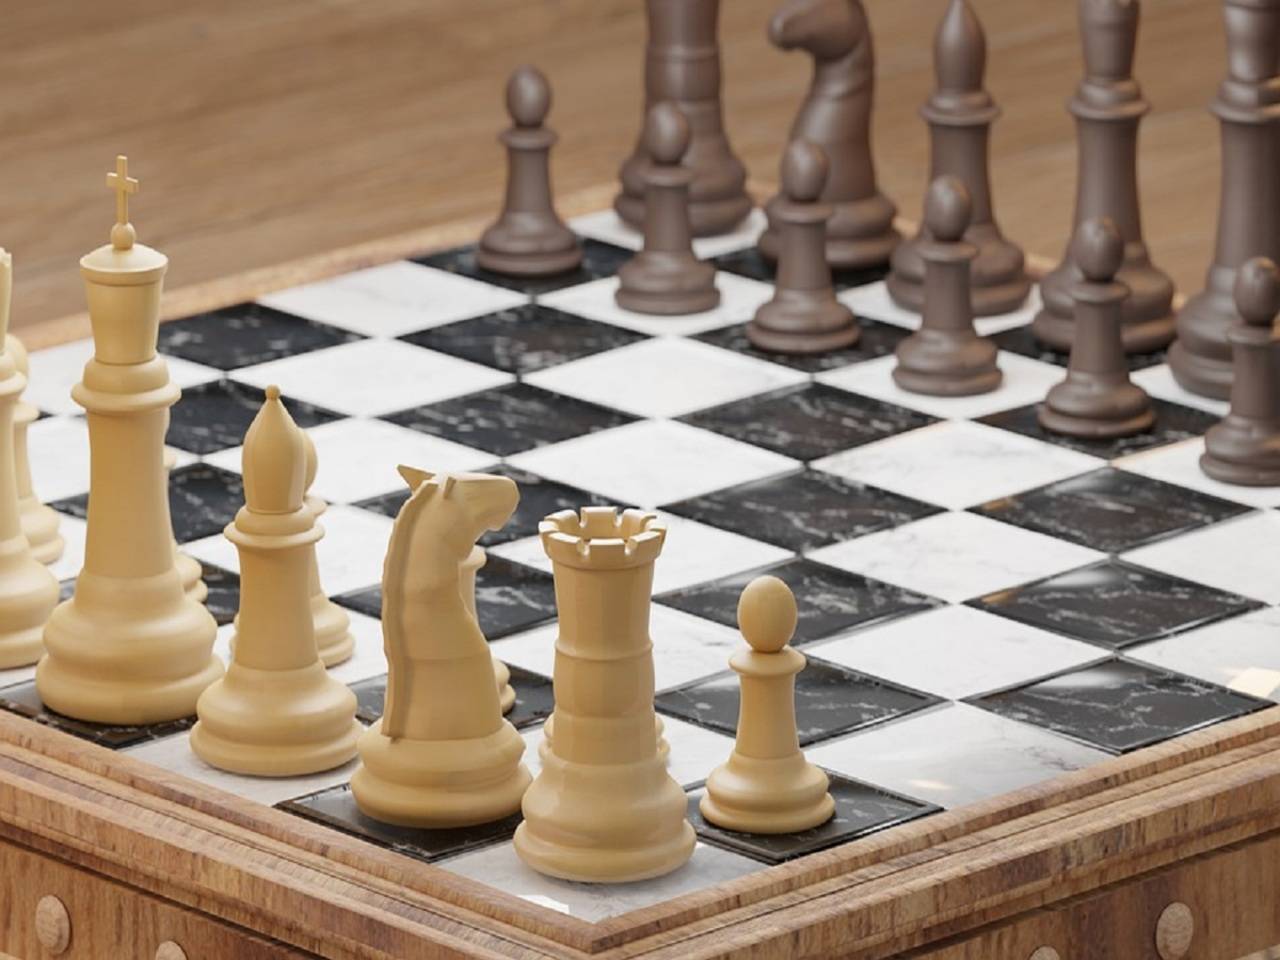 ChessBase India - You must have seen chess pieces made of